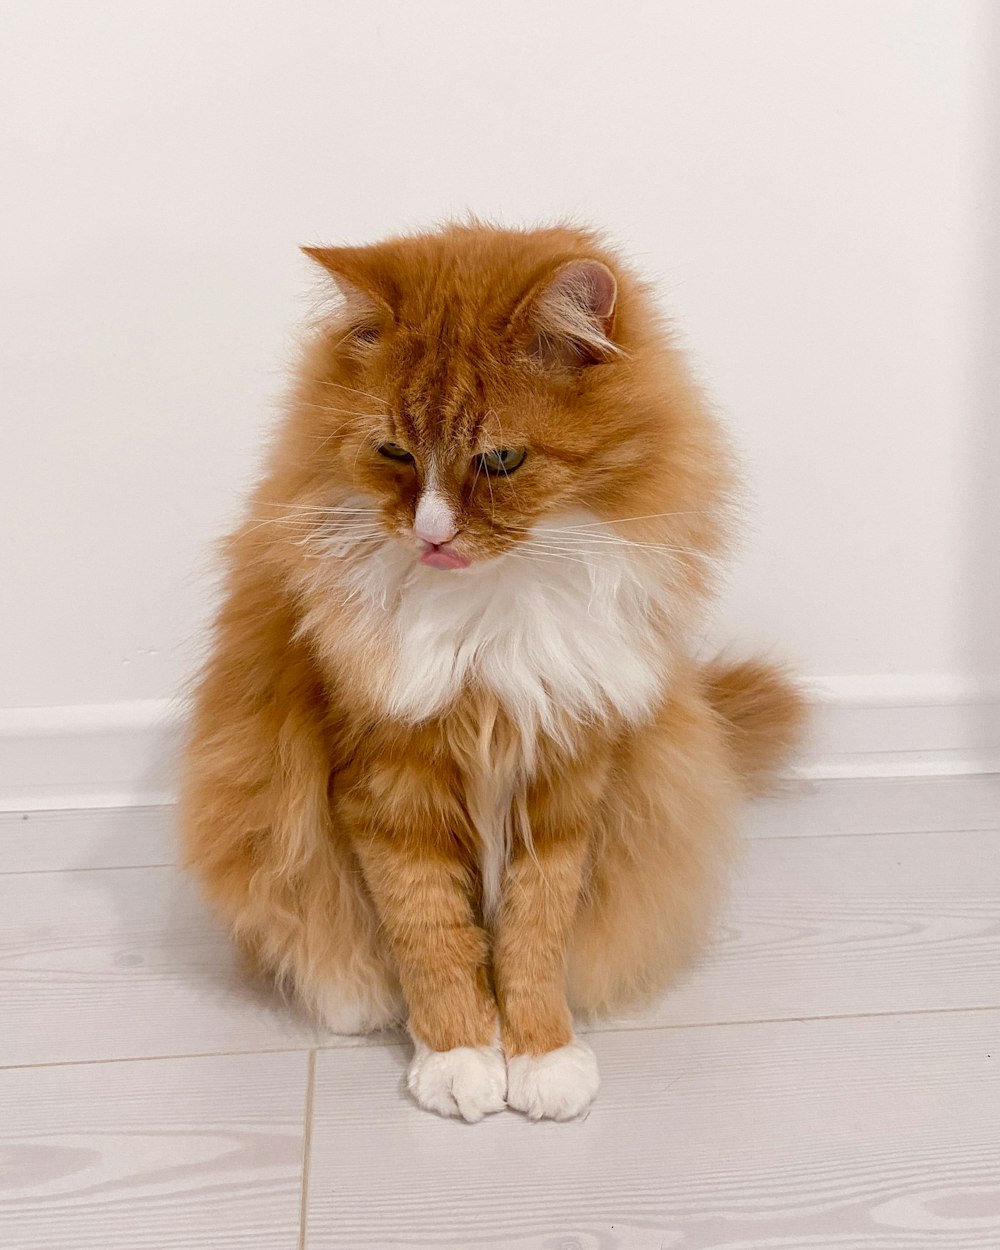 a fluffy orange and white cat sitting on the floor